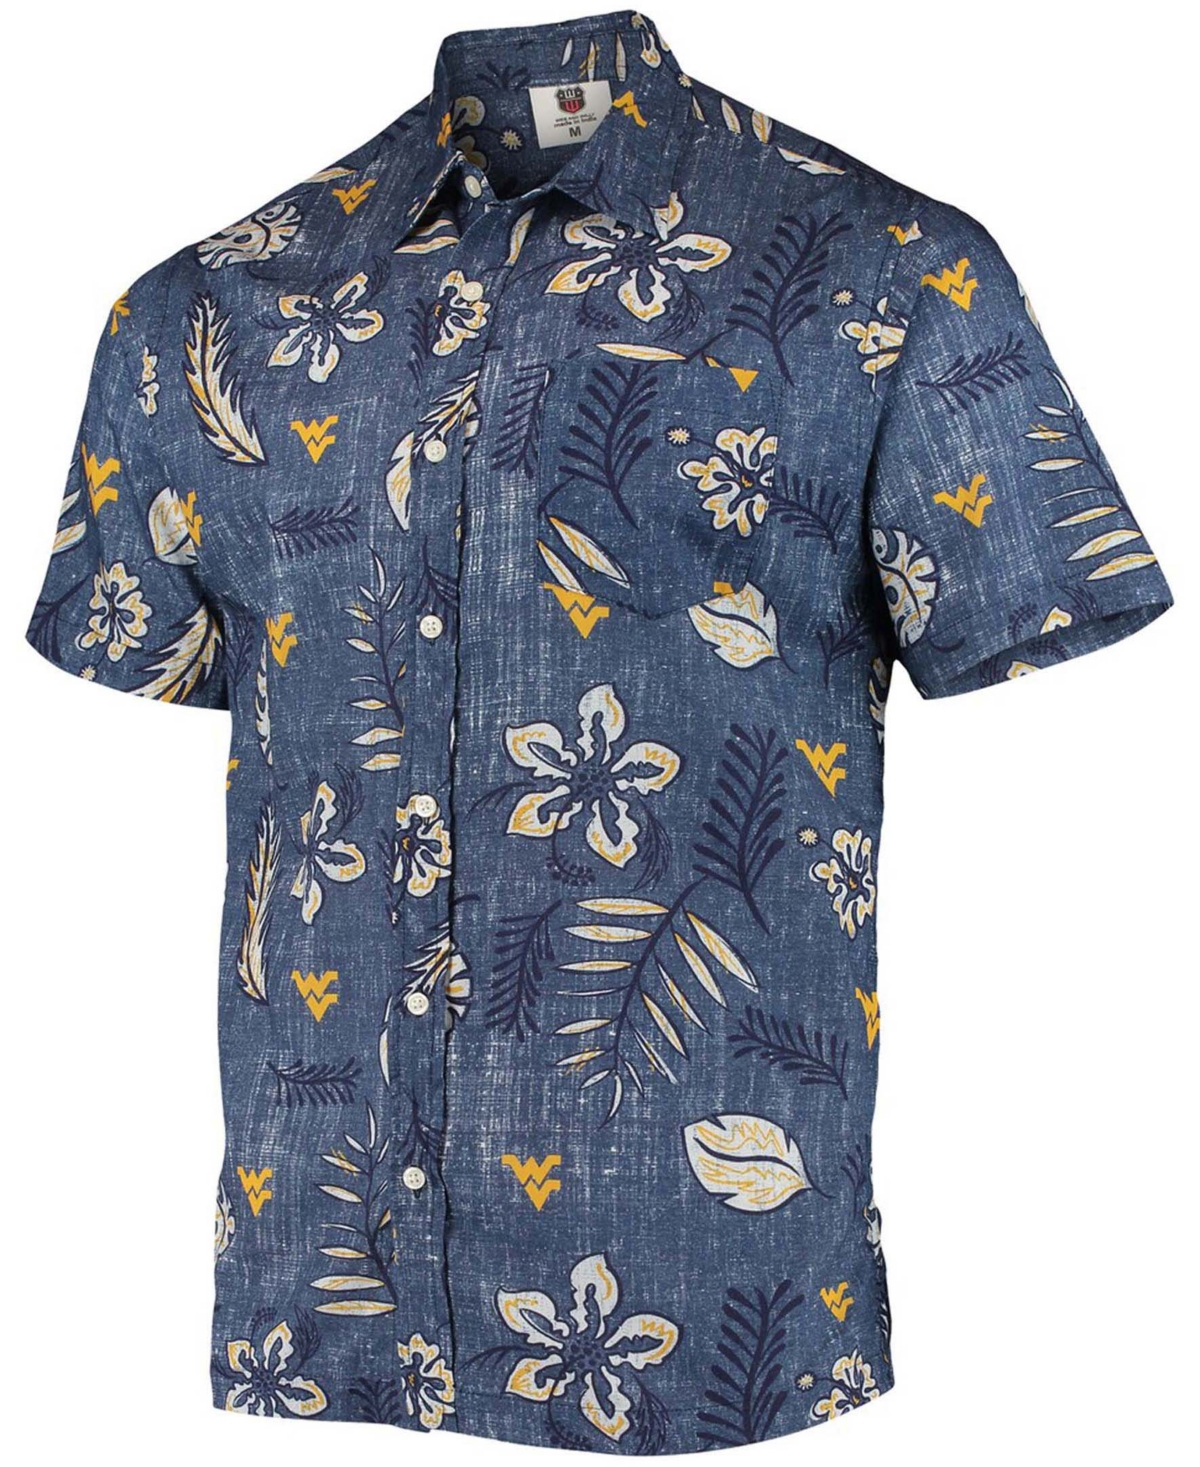 Men's Navy West Virginia Mountaineers Vintage-Like Floral Button-Up Shirt - Navy